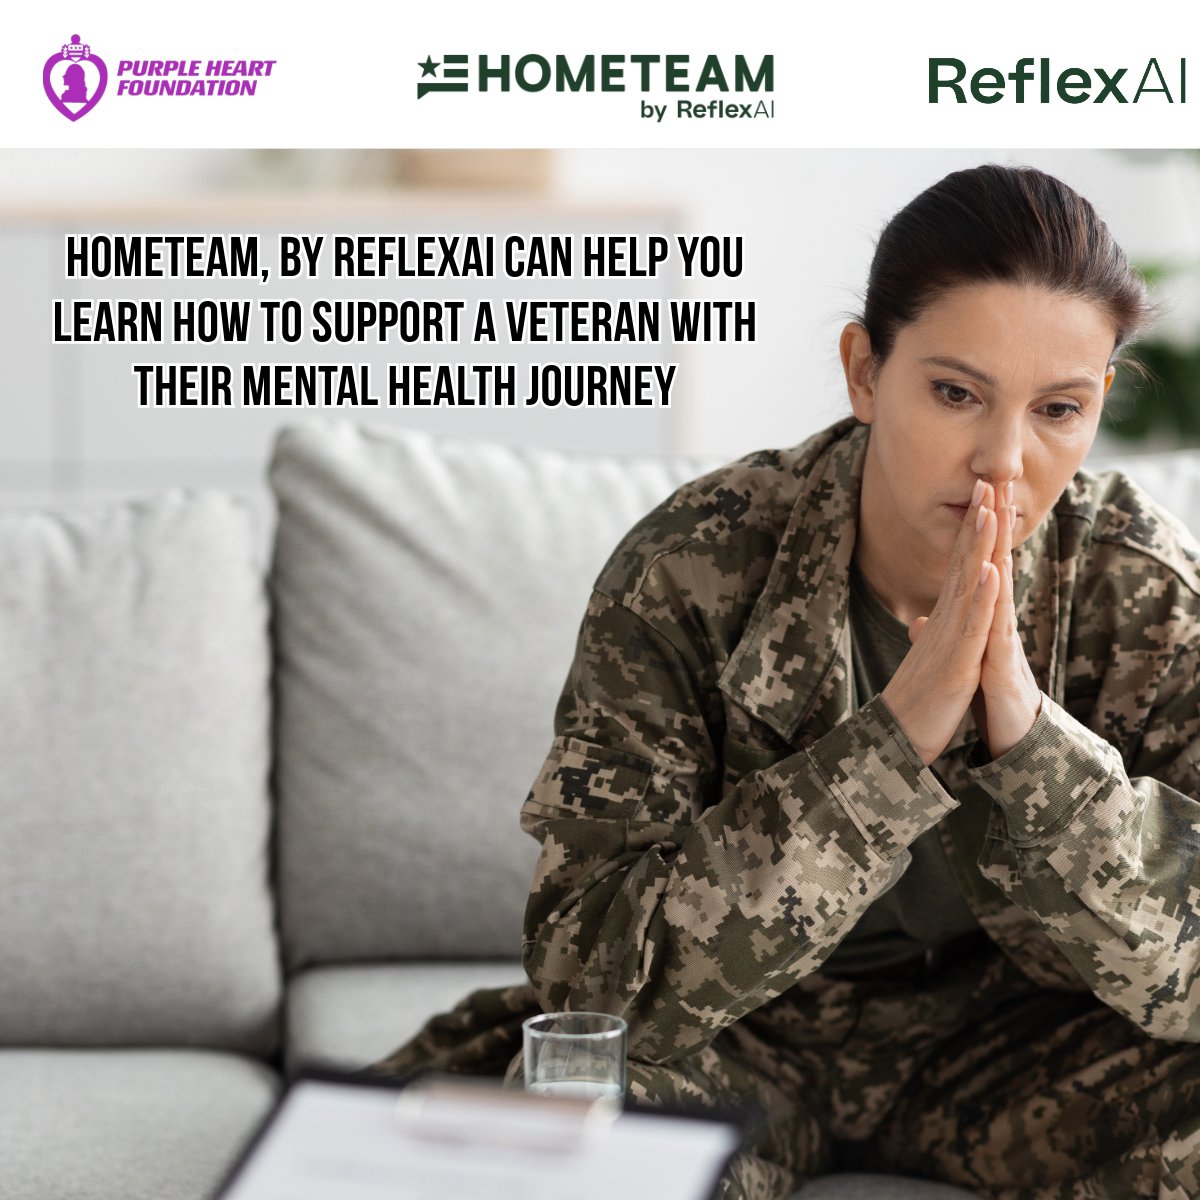 HomeTeam, by ReflexAI is an online AI innovative educational program that gives anyone the skills to speak with Veterans about their Mental Health journey. You can access HomeTeam by using our code PHF2023. Click the link below. hometeam.reflexai.com